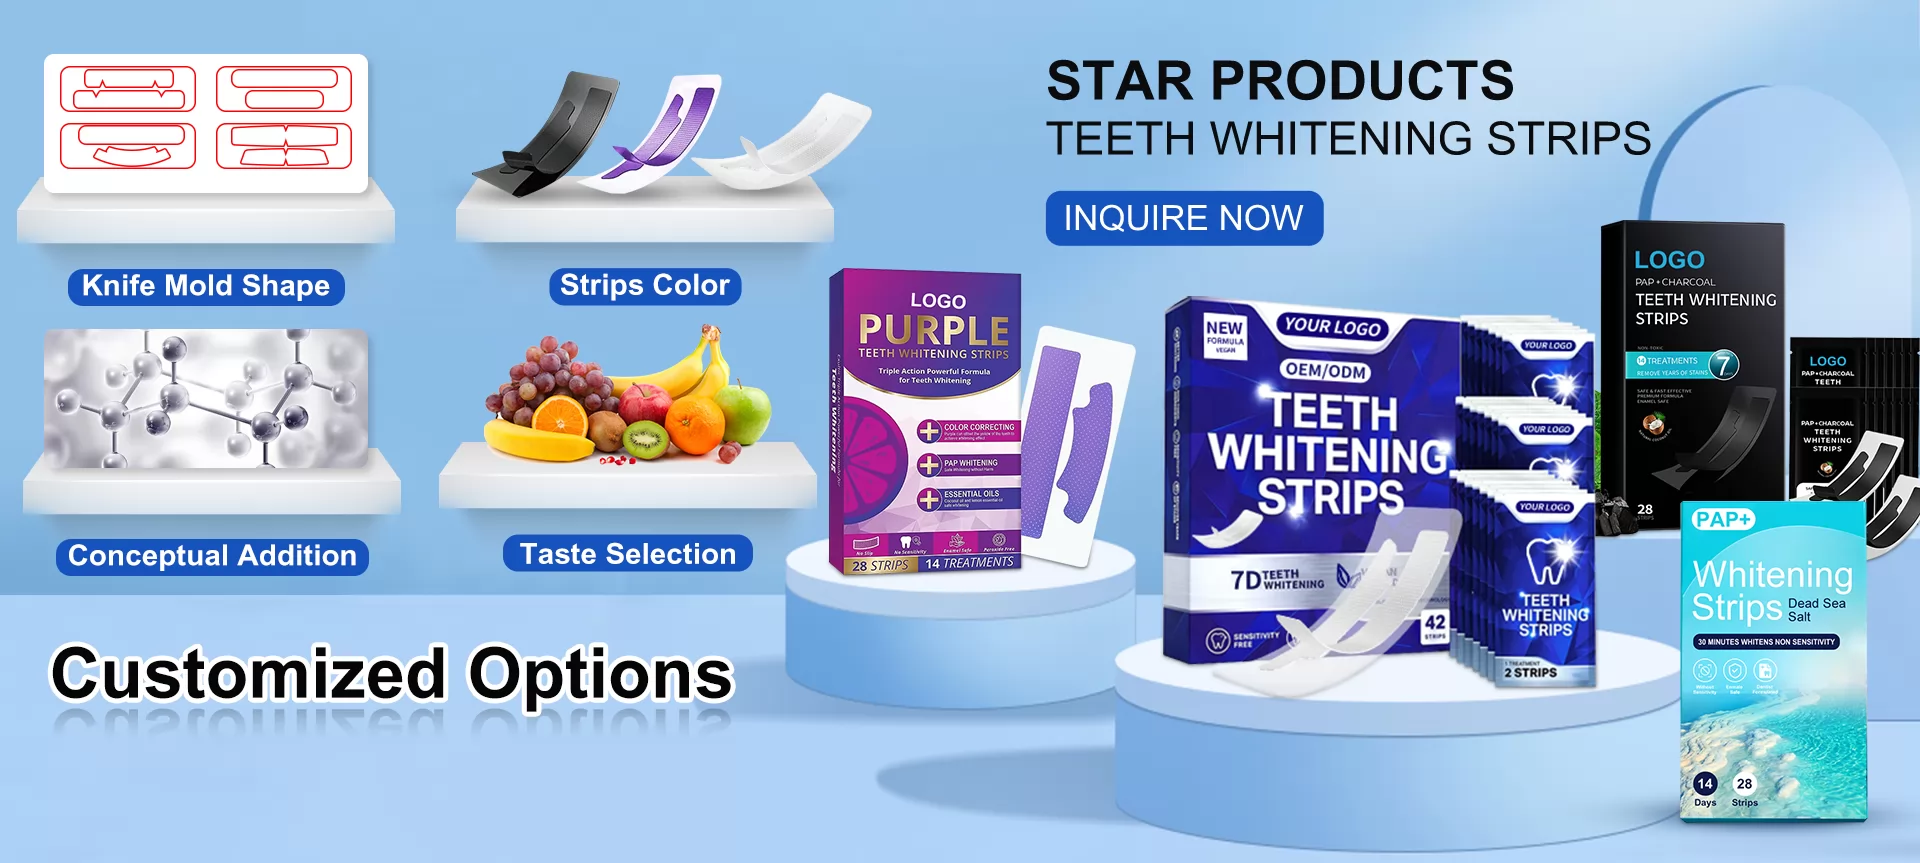 Teeth whitening strips OEM ODM private label. The latest tooth whitening strip technology, industry-leading technology!